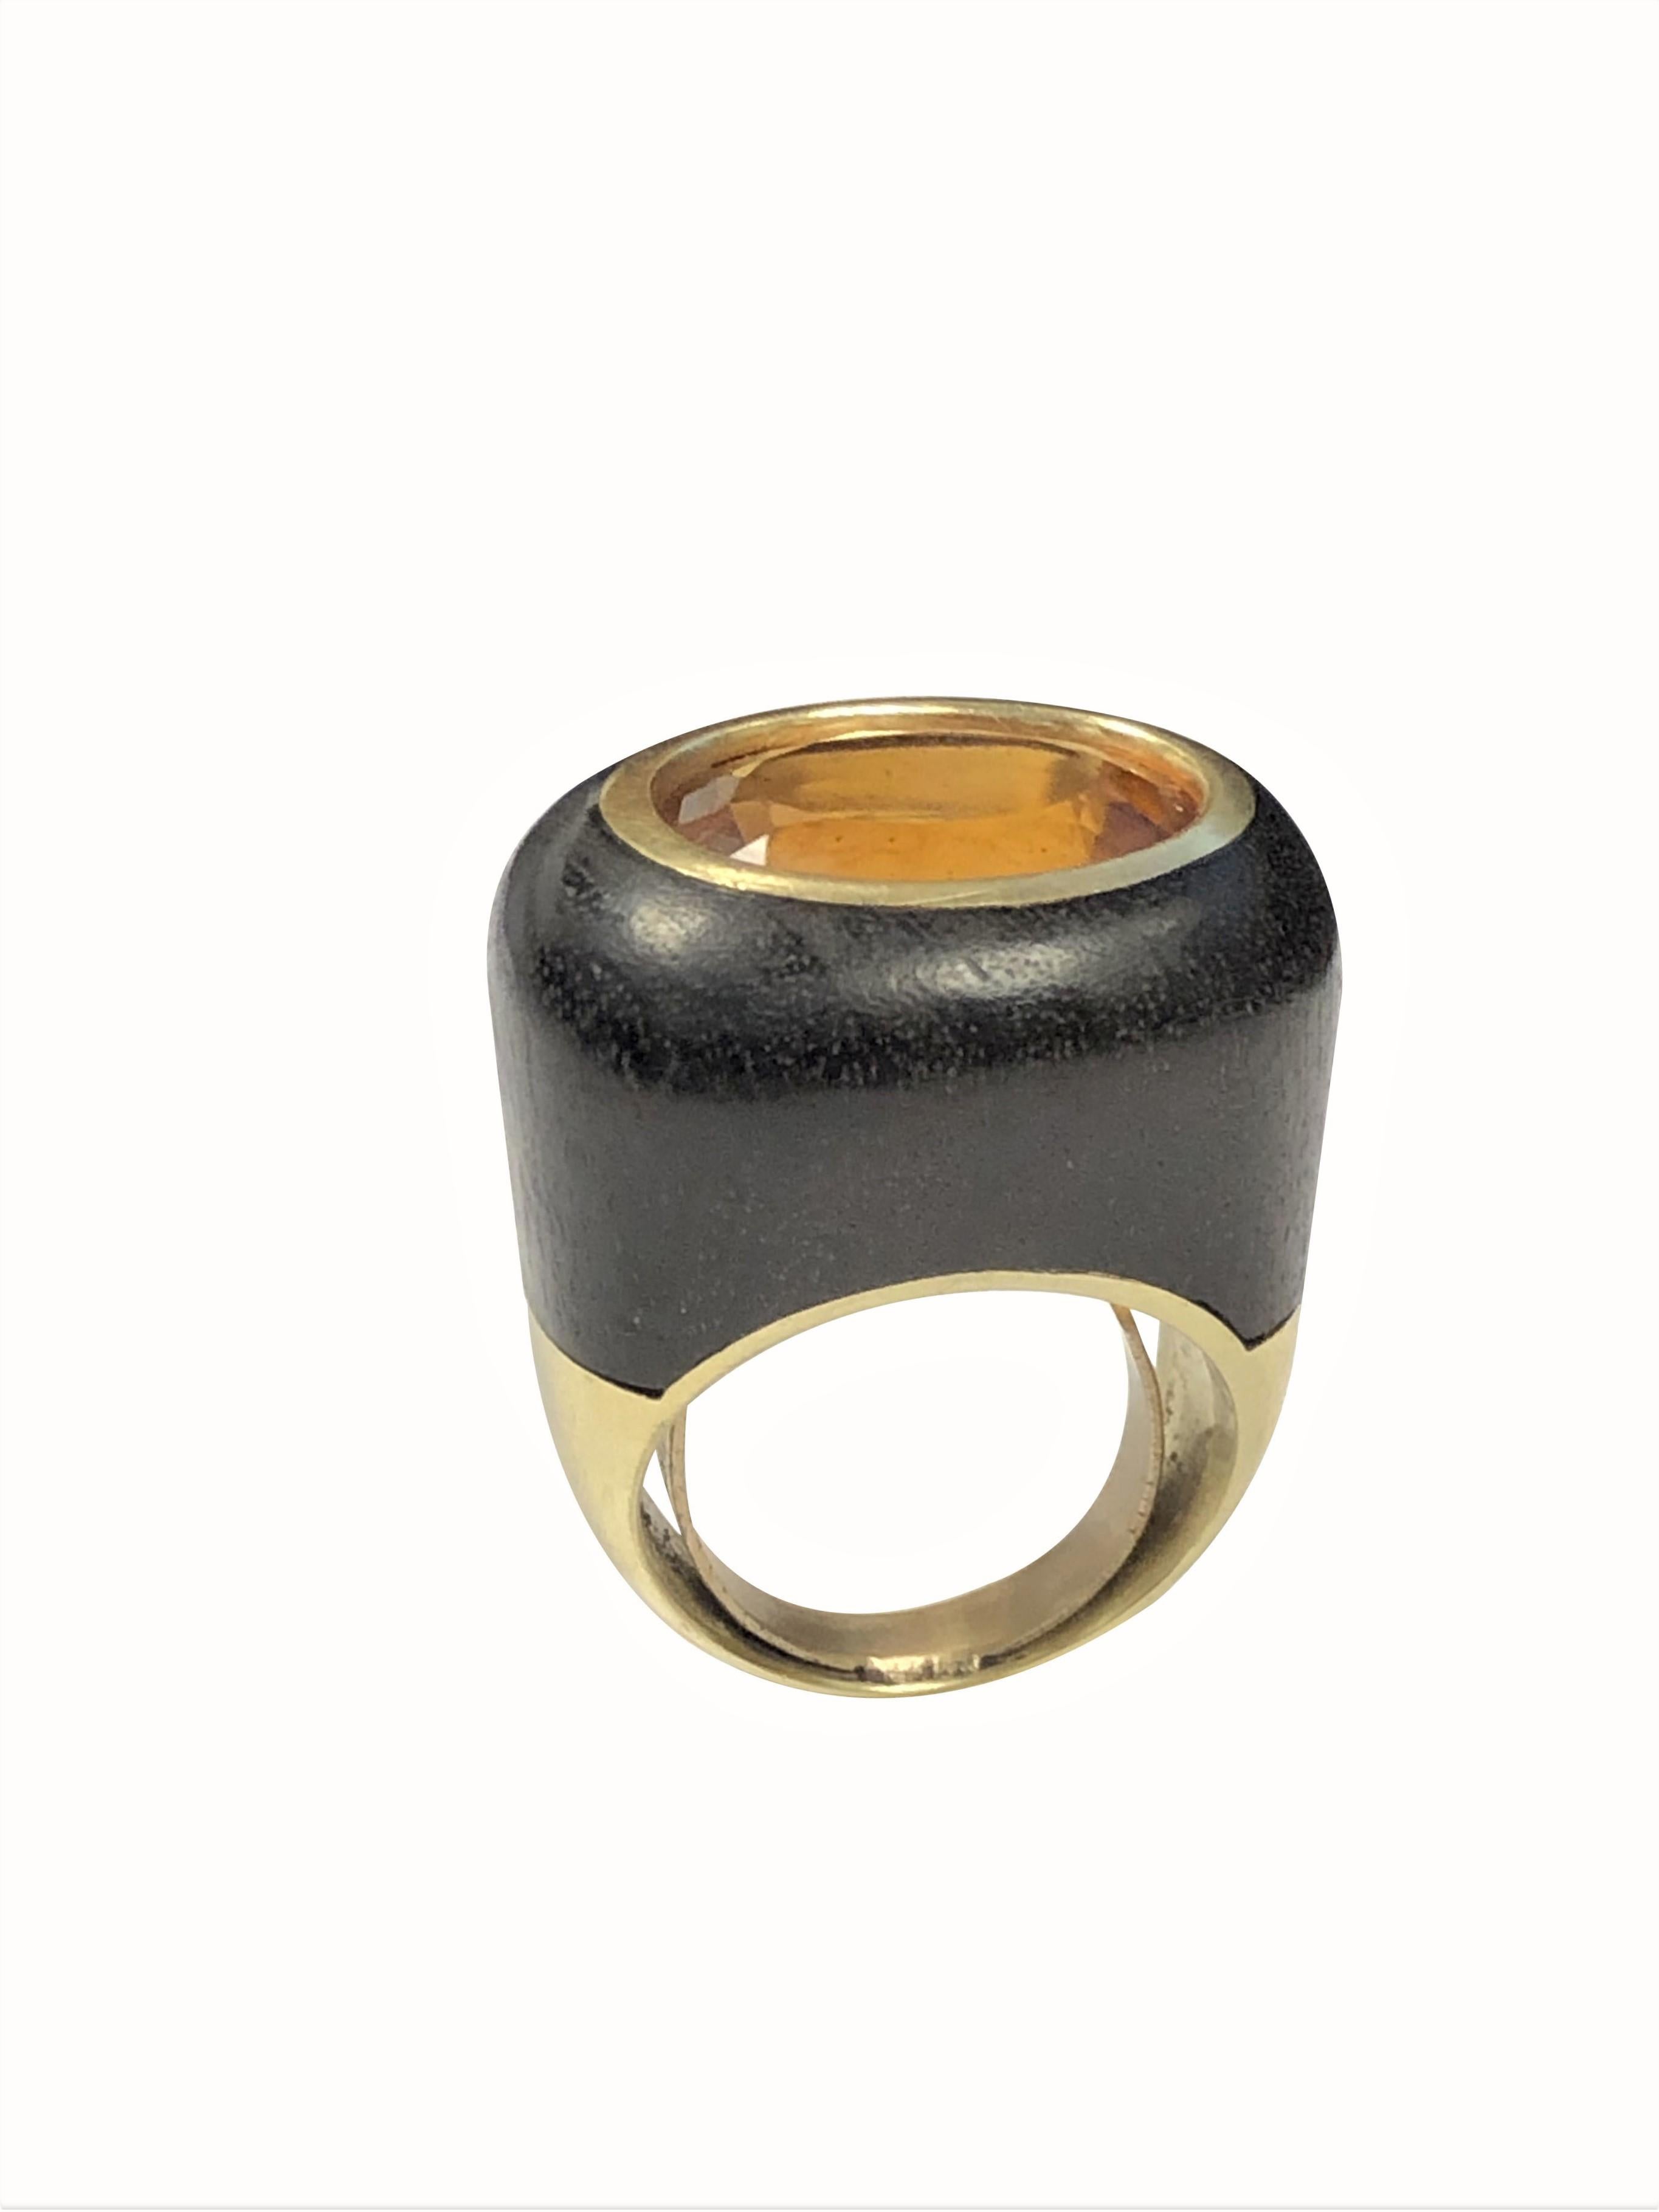 Circa 1980s 18K Yellow Gold Large Cocktail Ring, having a solid Mahogany wood central section, measuring 3/4 inch wide,  1 inch in length with the top of the ring measuring 7/8 X 3/4 inch. A very fine Color Oval Golden Topaz measuring 15 X 12 M.M.